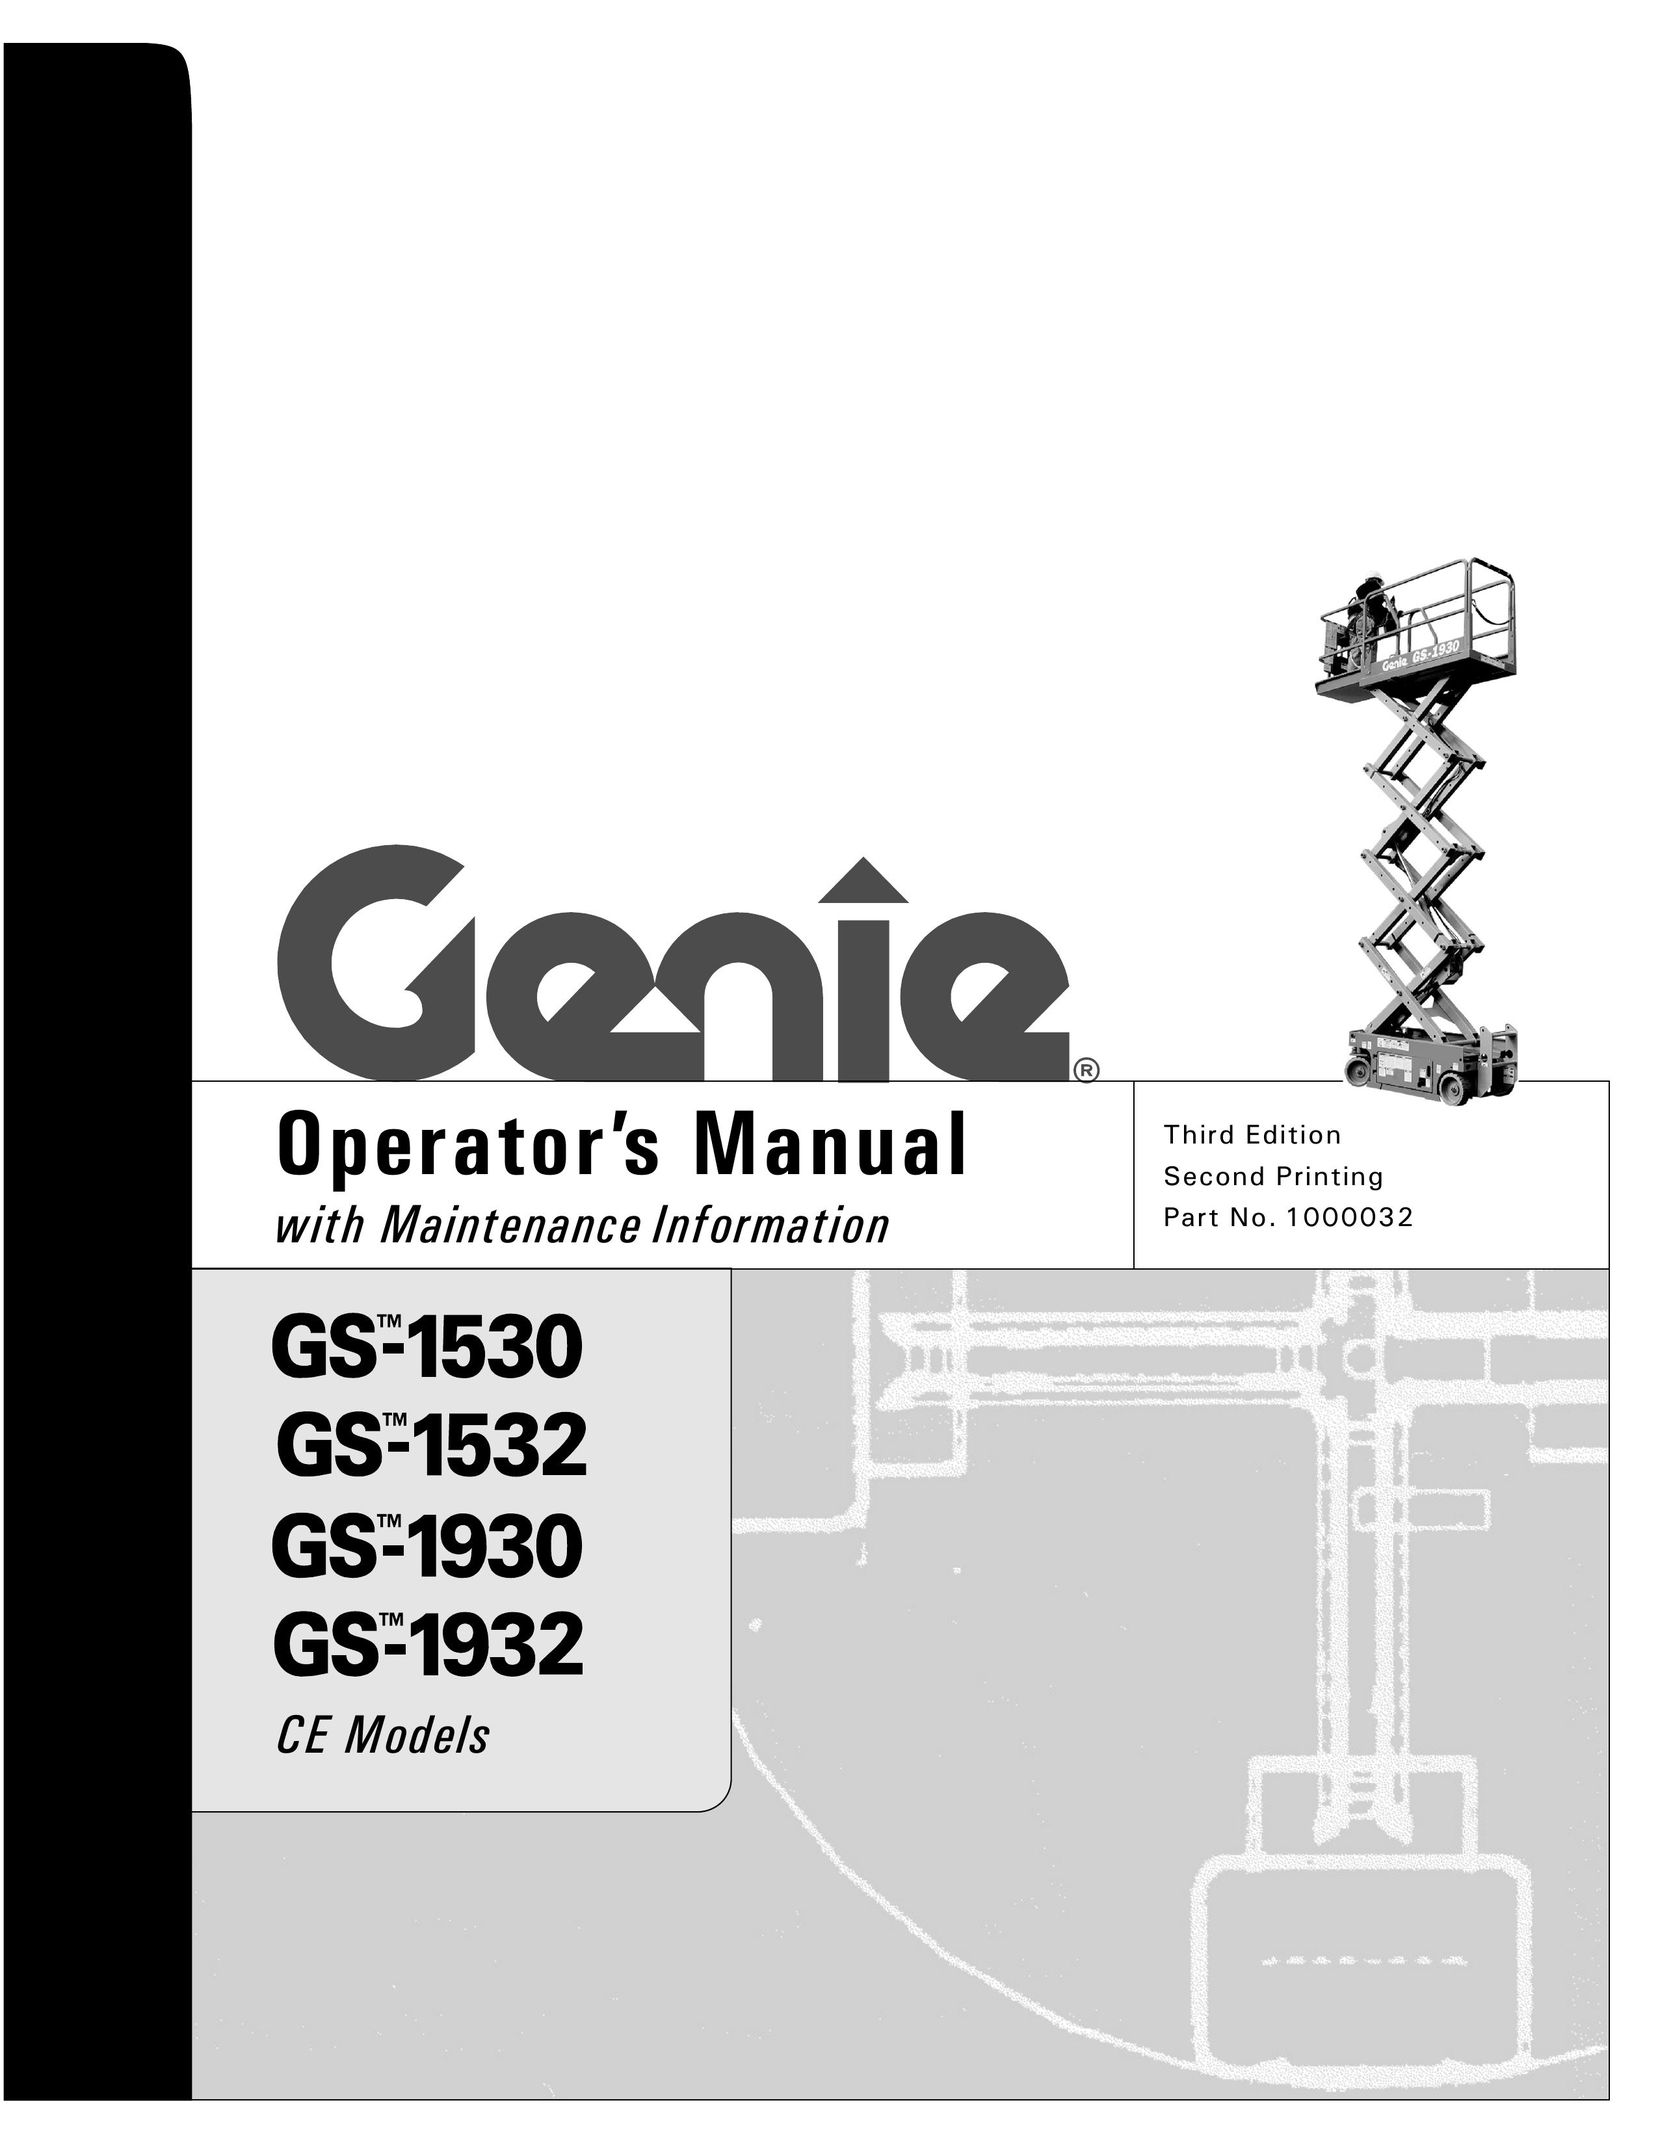 Genie GS-1532 Home Safety Product User Manual